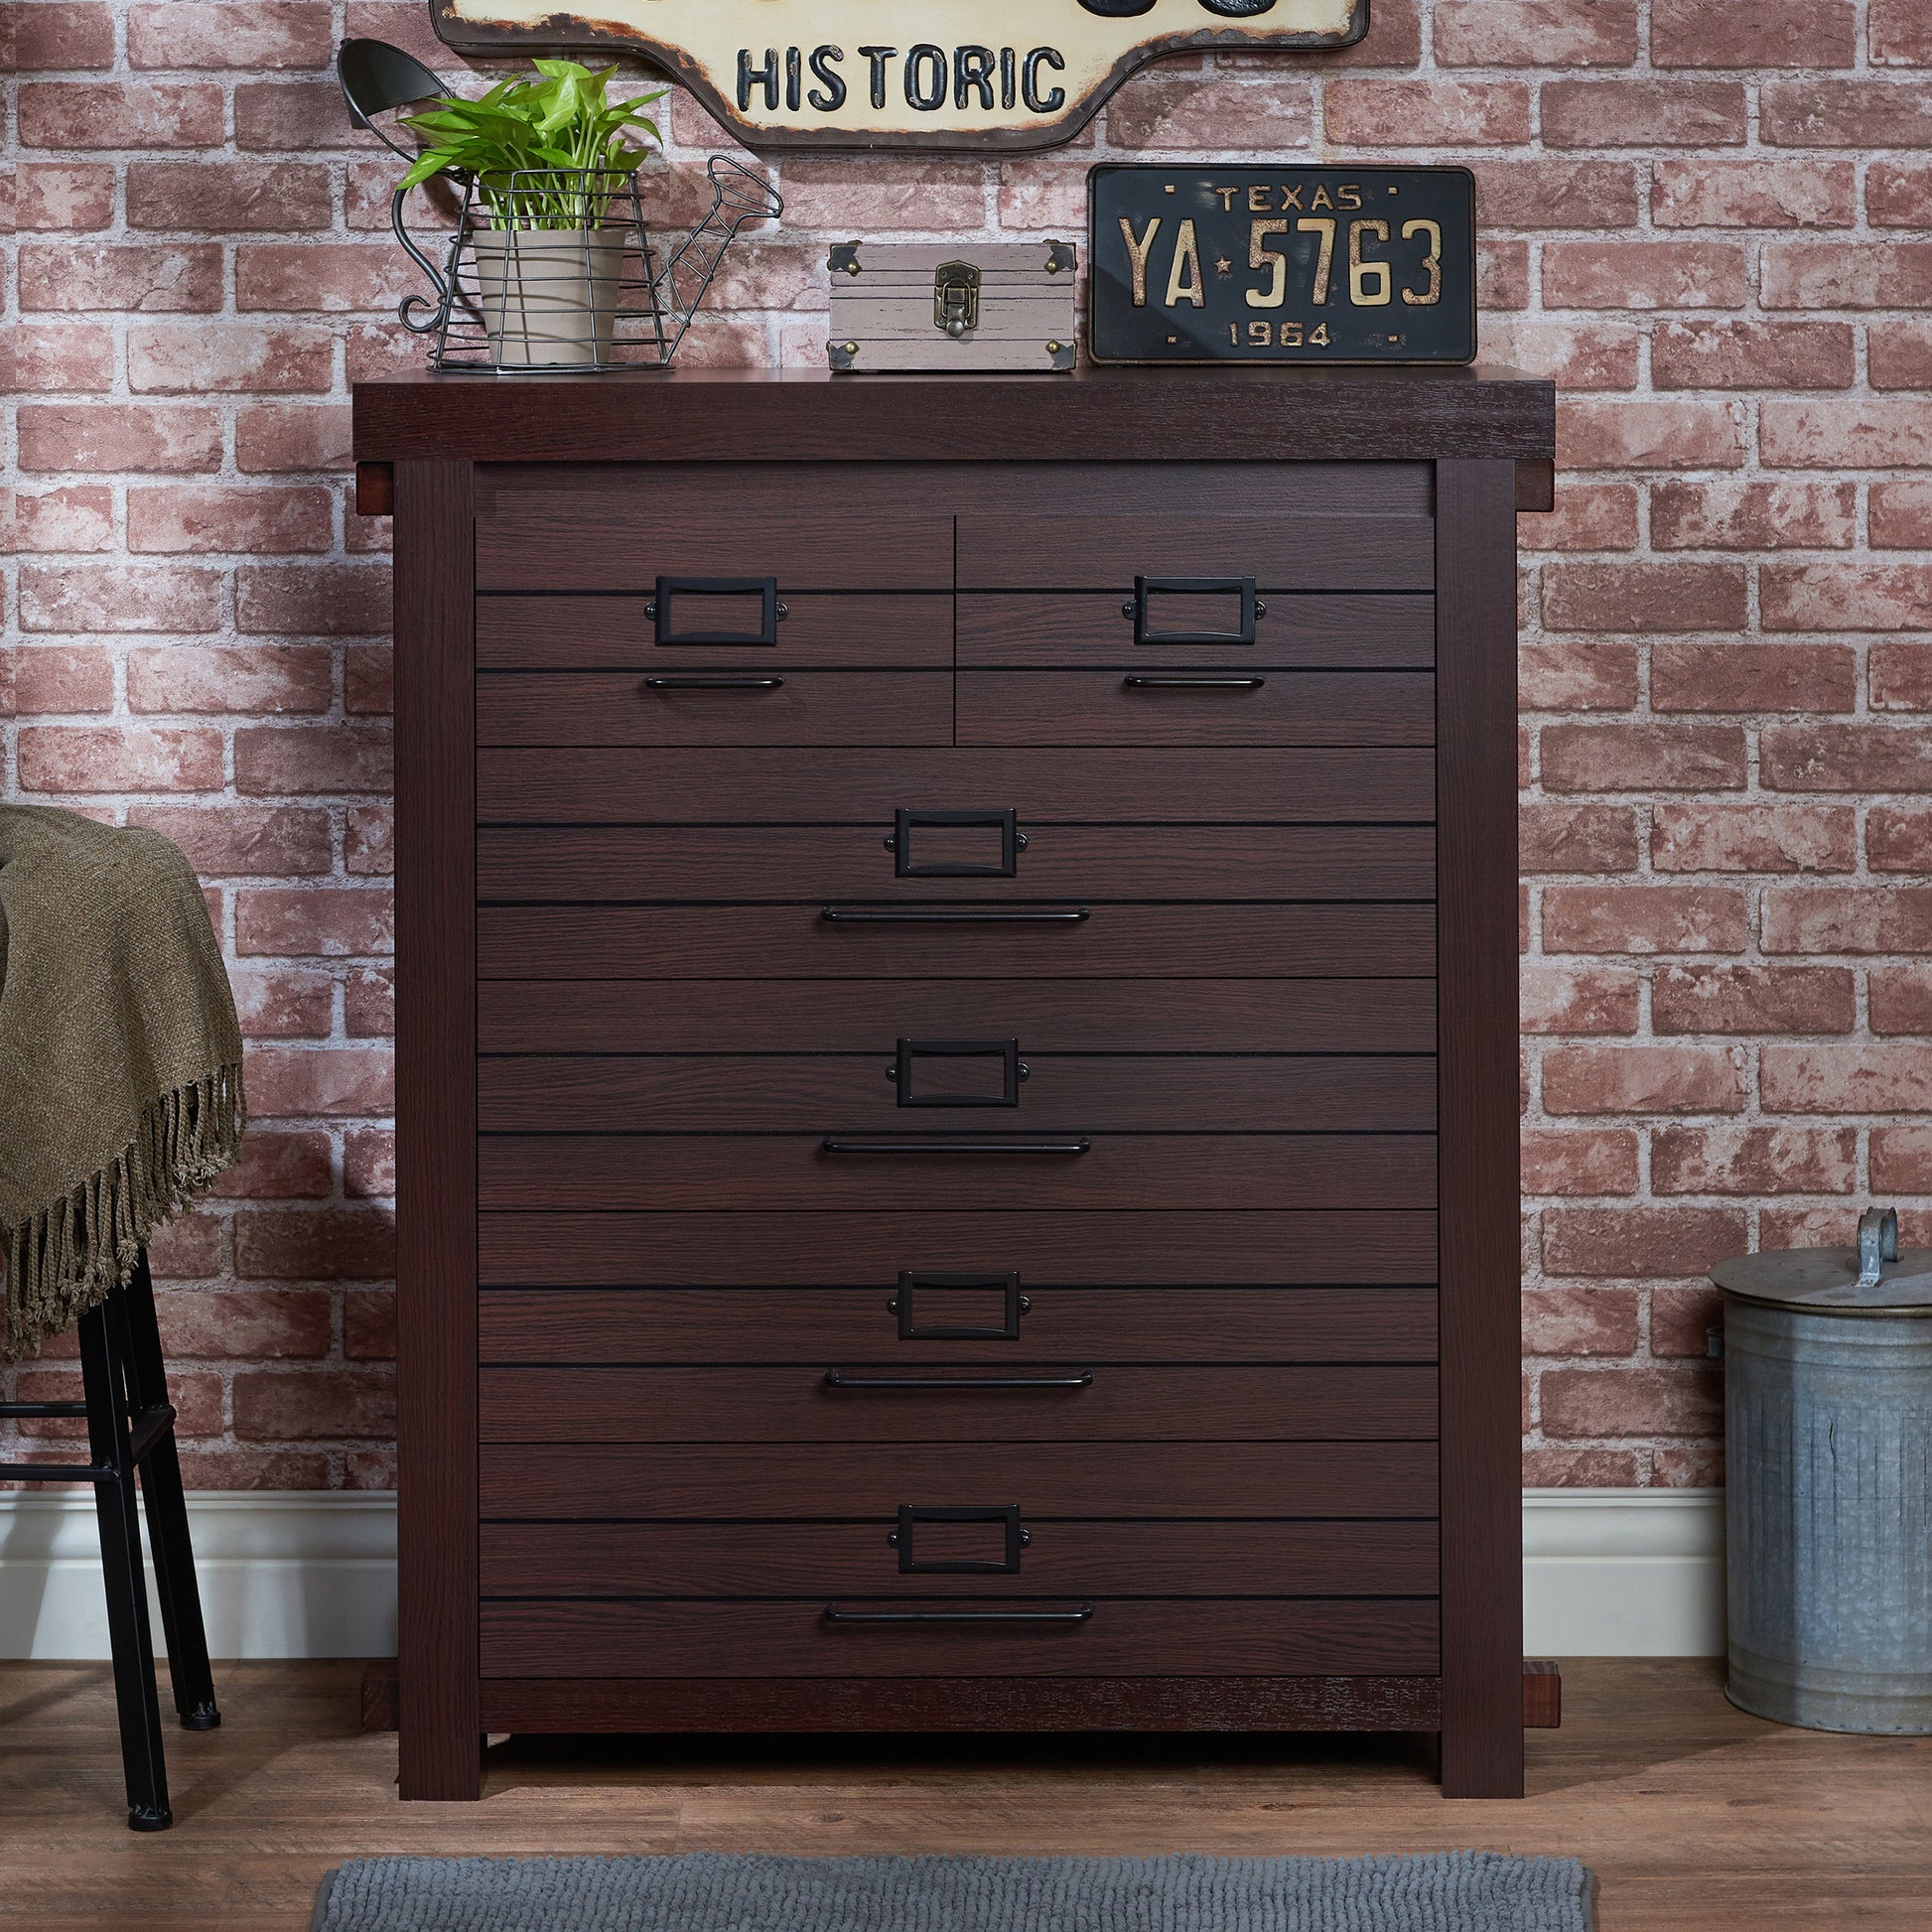 Front-facing rustic espresso six-drawer plank chest dresser in a living space with accessories